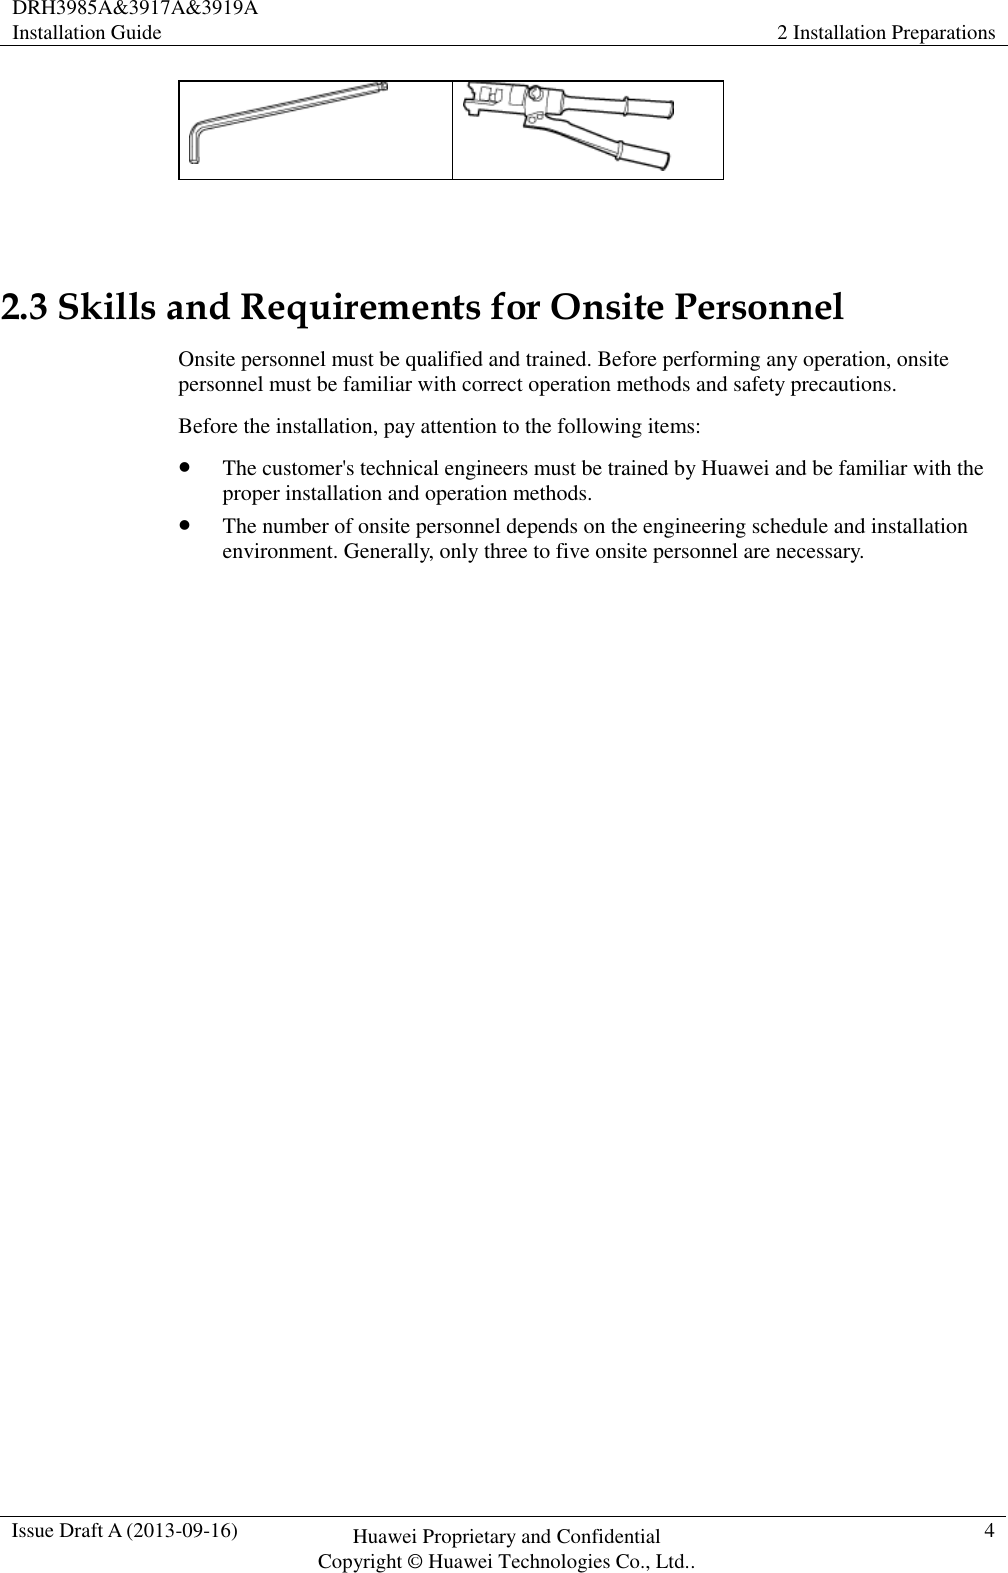 DRH3985A&amp;3917A&amp;3919A Installation Guide 2 Installation Preparations  Issue Draft A (2013-09-16) Huawei Proprietary and Confidential                                     Copyright © Huawei Technologies Co., Ltd.. 4     2.3 Skills and Requirements for Onsite Personnel Onsite personnel must be qualified and trained. Before performing any operation, onsite personnel must be familiar with correct operation methods and safety precautions. Before the installation, pay attention to the following items:  The customer&apos;s technical engineers must be trained by Huawei and be familiar with the proper installation and operation methods.  The number of onsite personnel depends on the engineering schedule and installation environment. Generally, only three to five onsite personnel are necessary. 